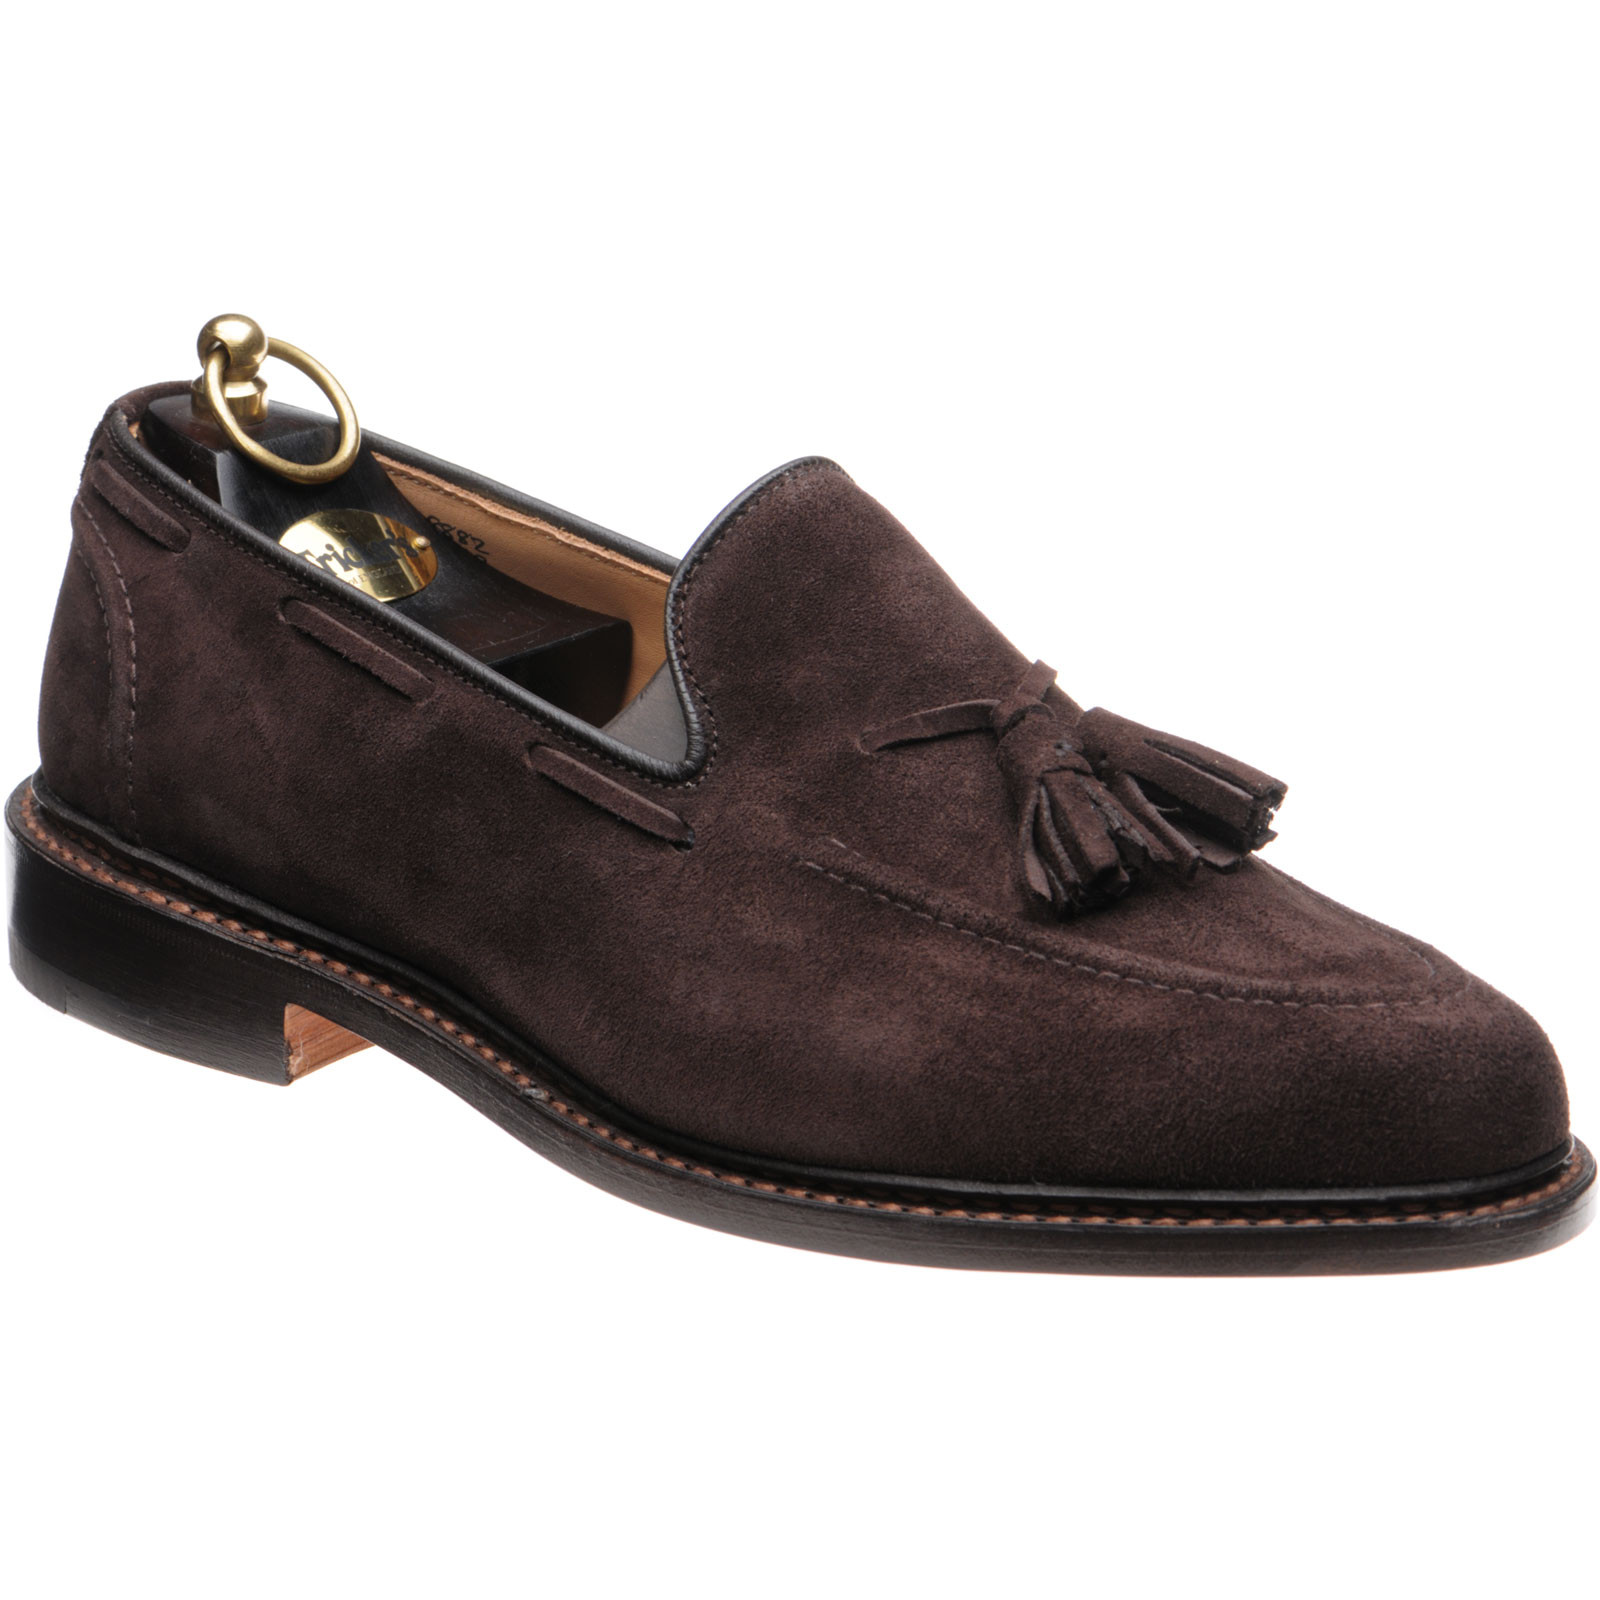 Trickers shoes | Trickers Town | Elton tasselled loafers in Coffee ...